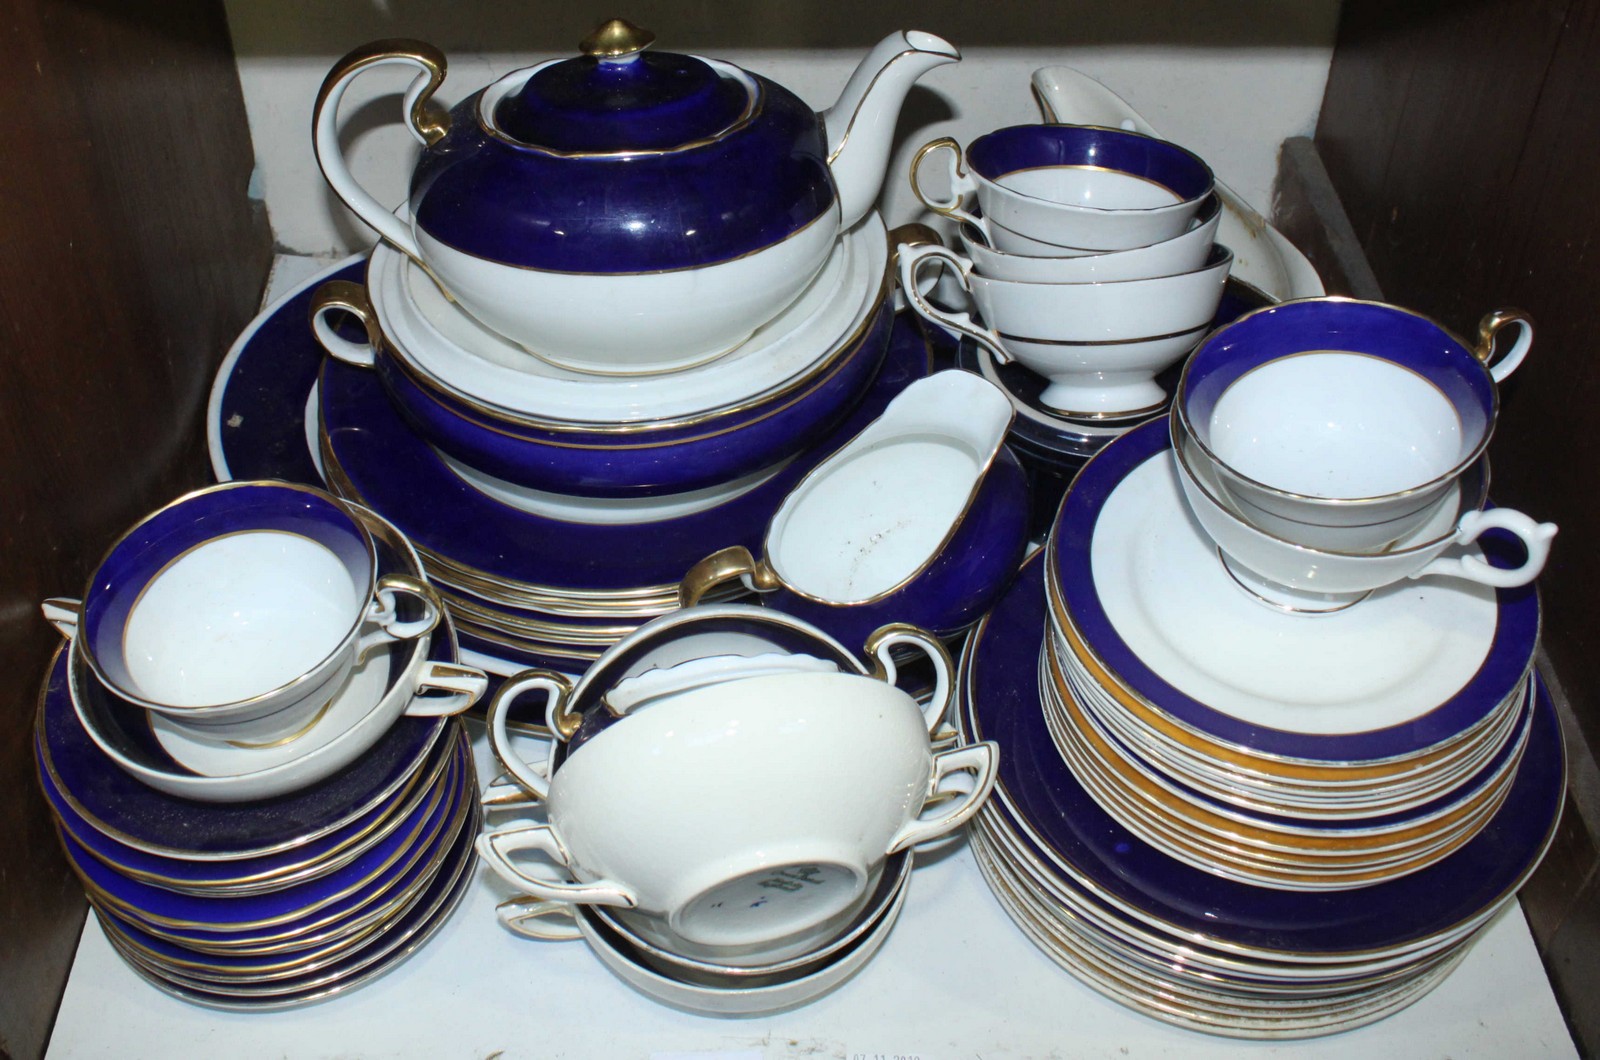 SECTION 20. A quantity of Aynsley dinner and tea wares in white with blue and gilded rims, including